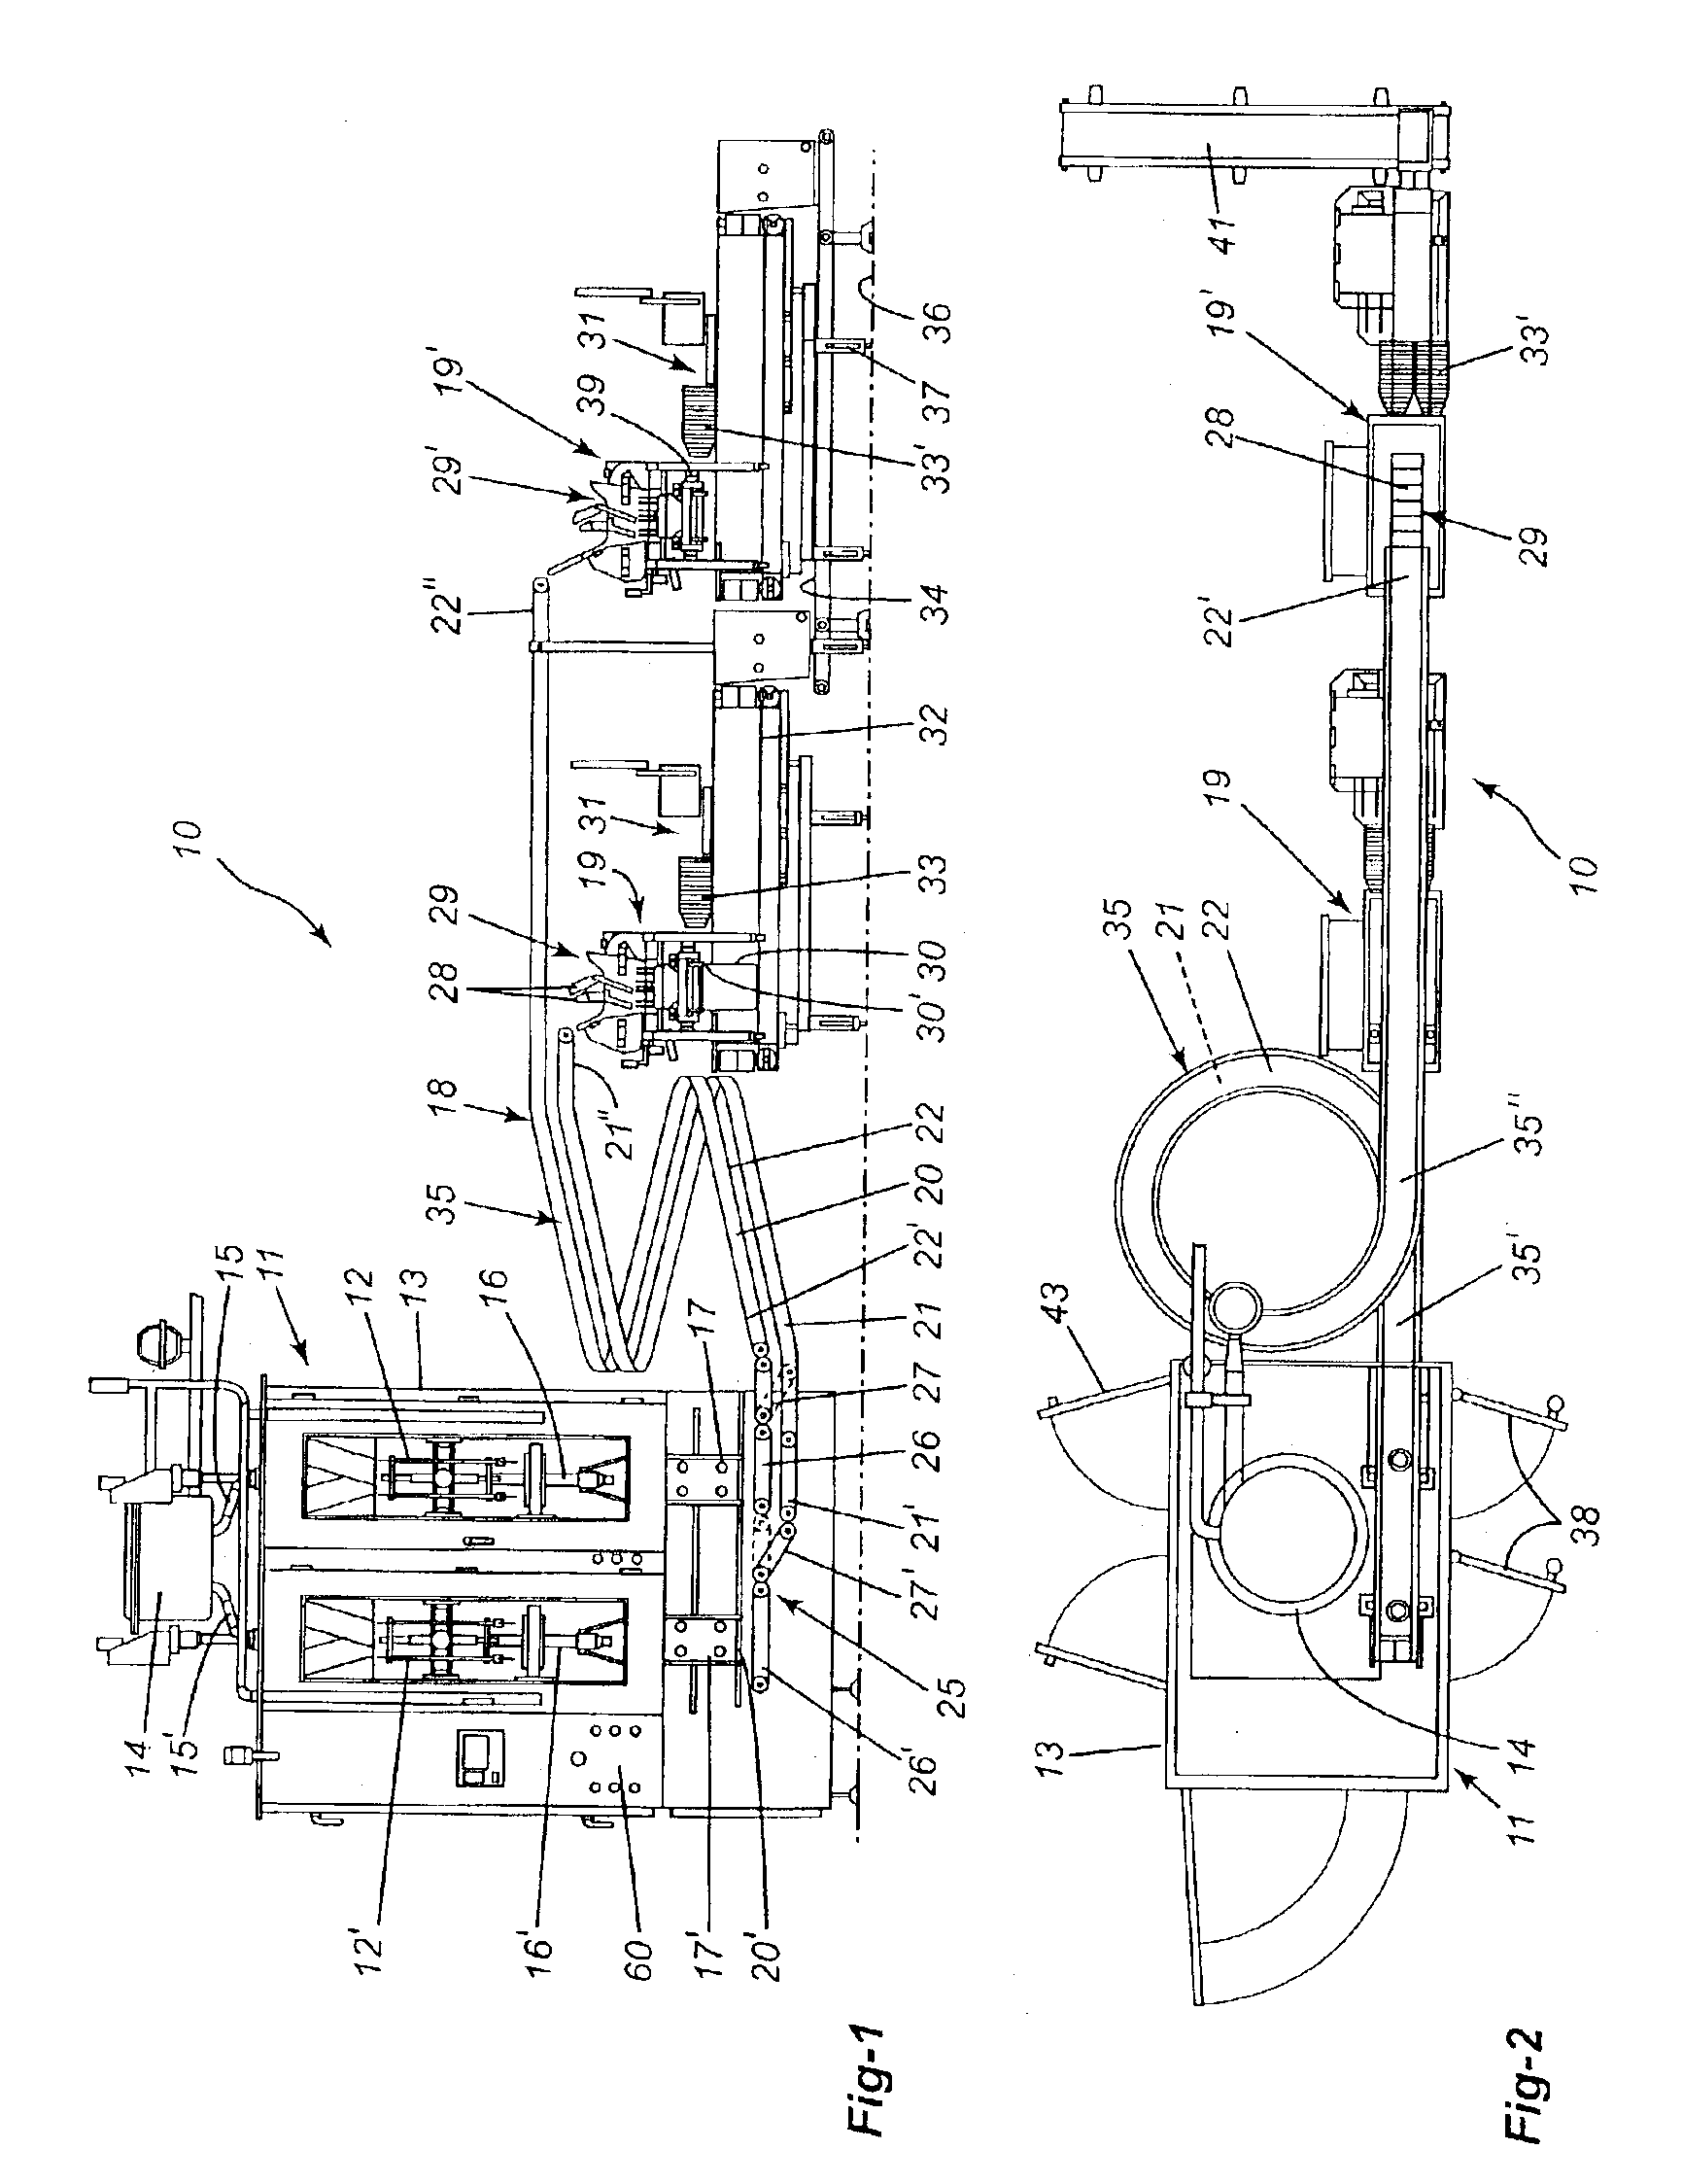 High speed bagging system and method